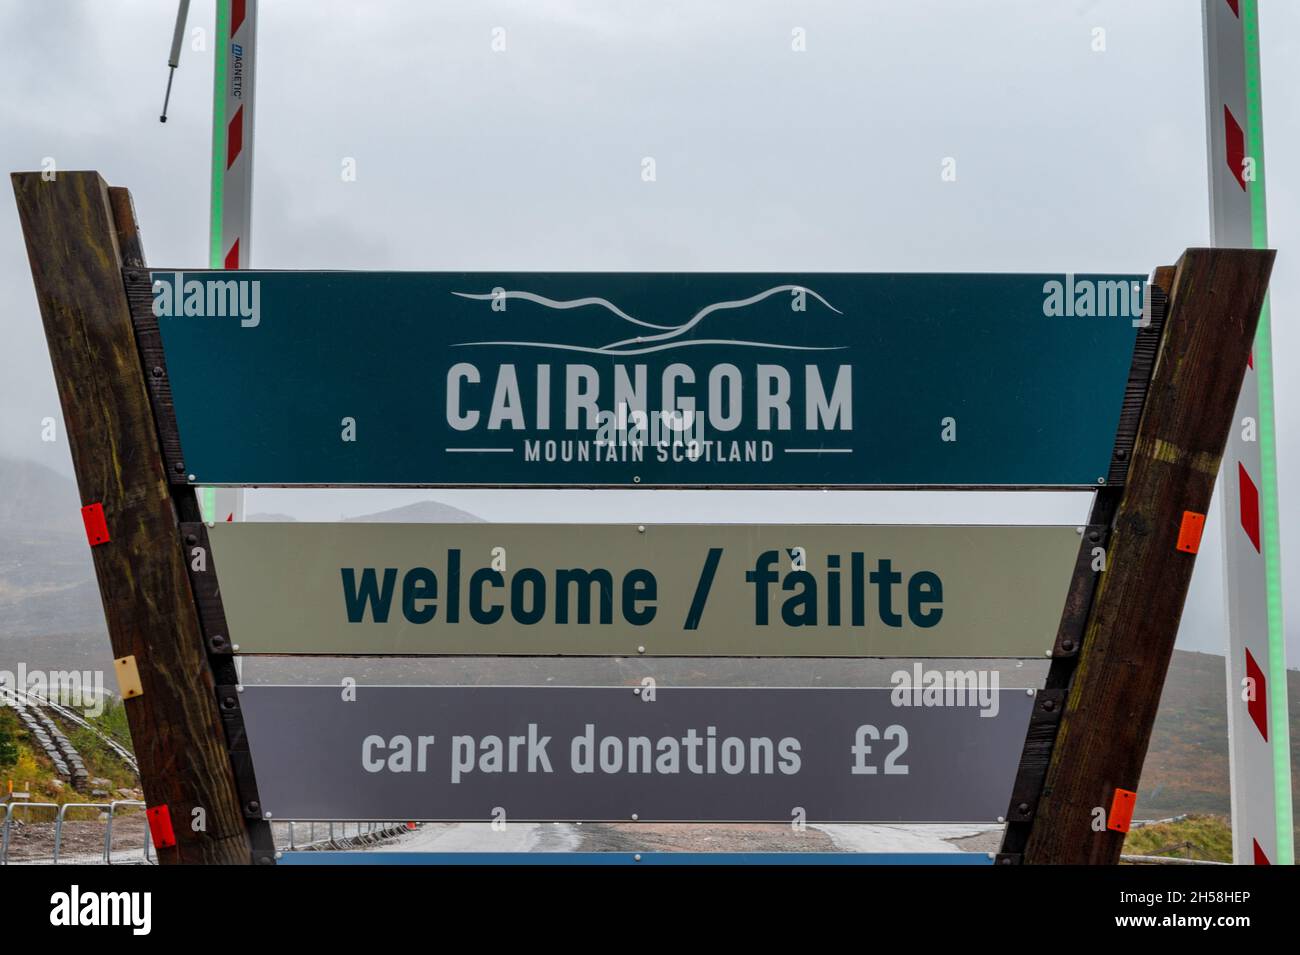 Cairngorm, Scotland- Oct 18, 2021:  The main sign for Cairngorm Mountain Scotland at the entrance to the car park of the ski lodge Stock Photo